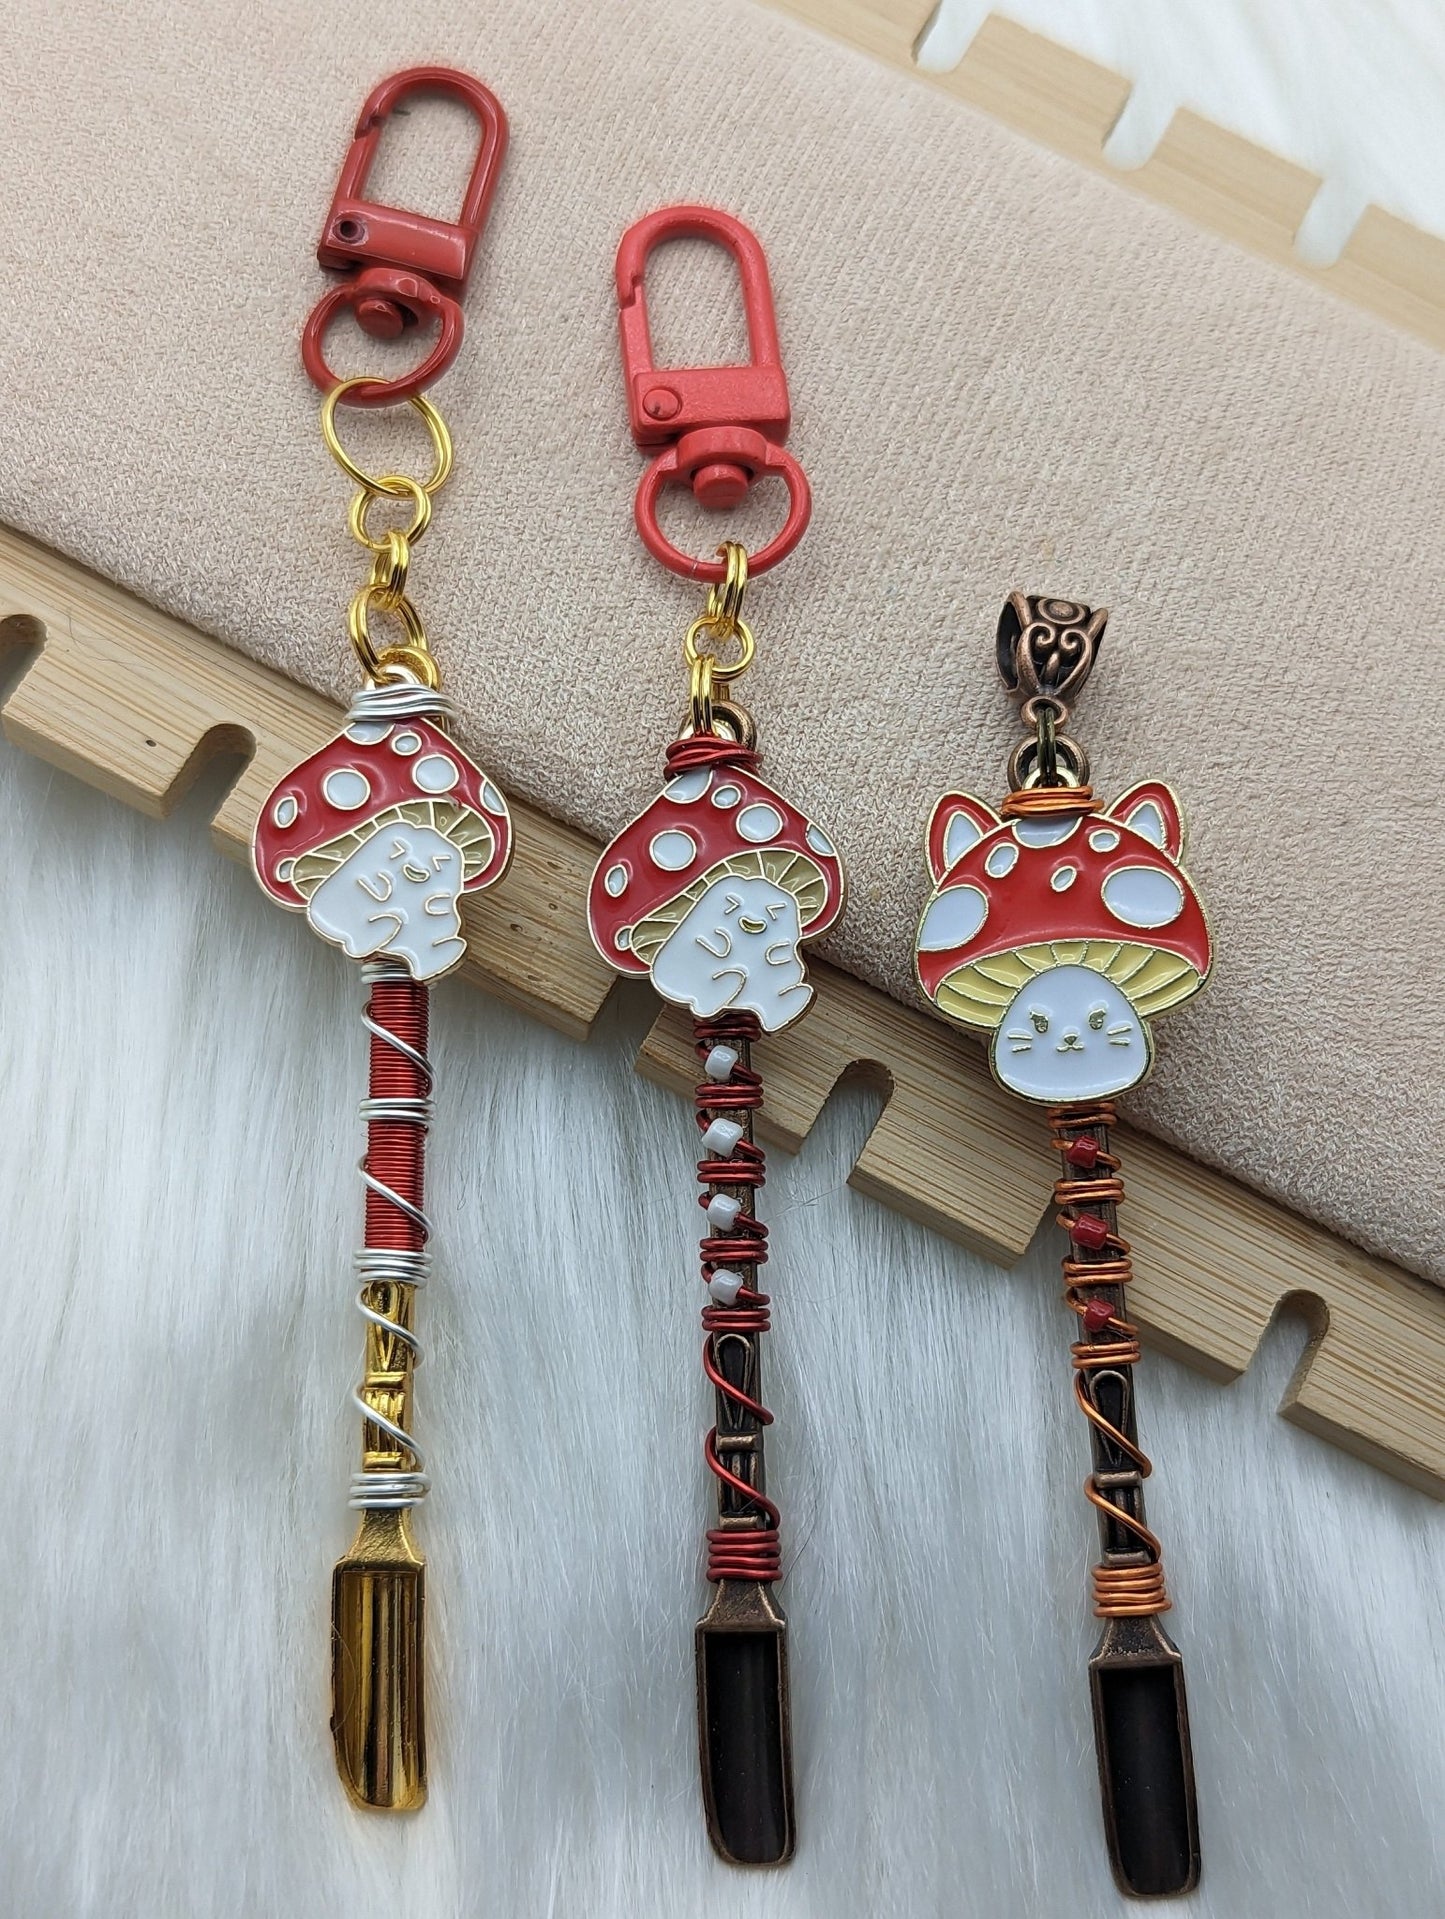 Wire Wrapped Mushroom Mini Spoon Necklaces and Keychains - Groove Spoons